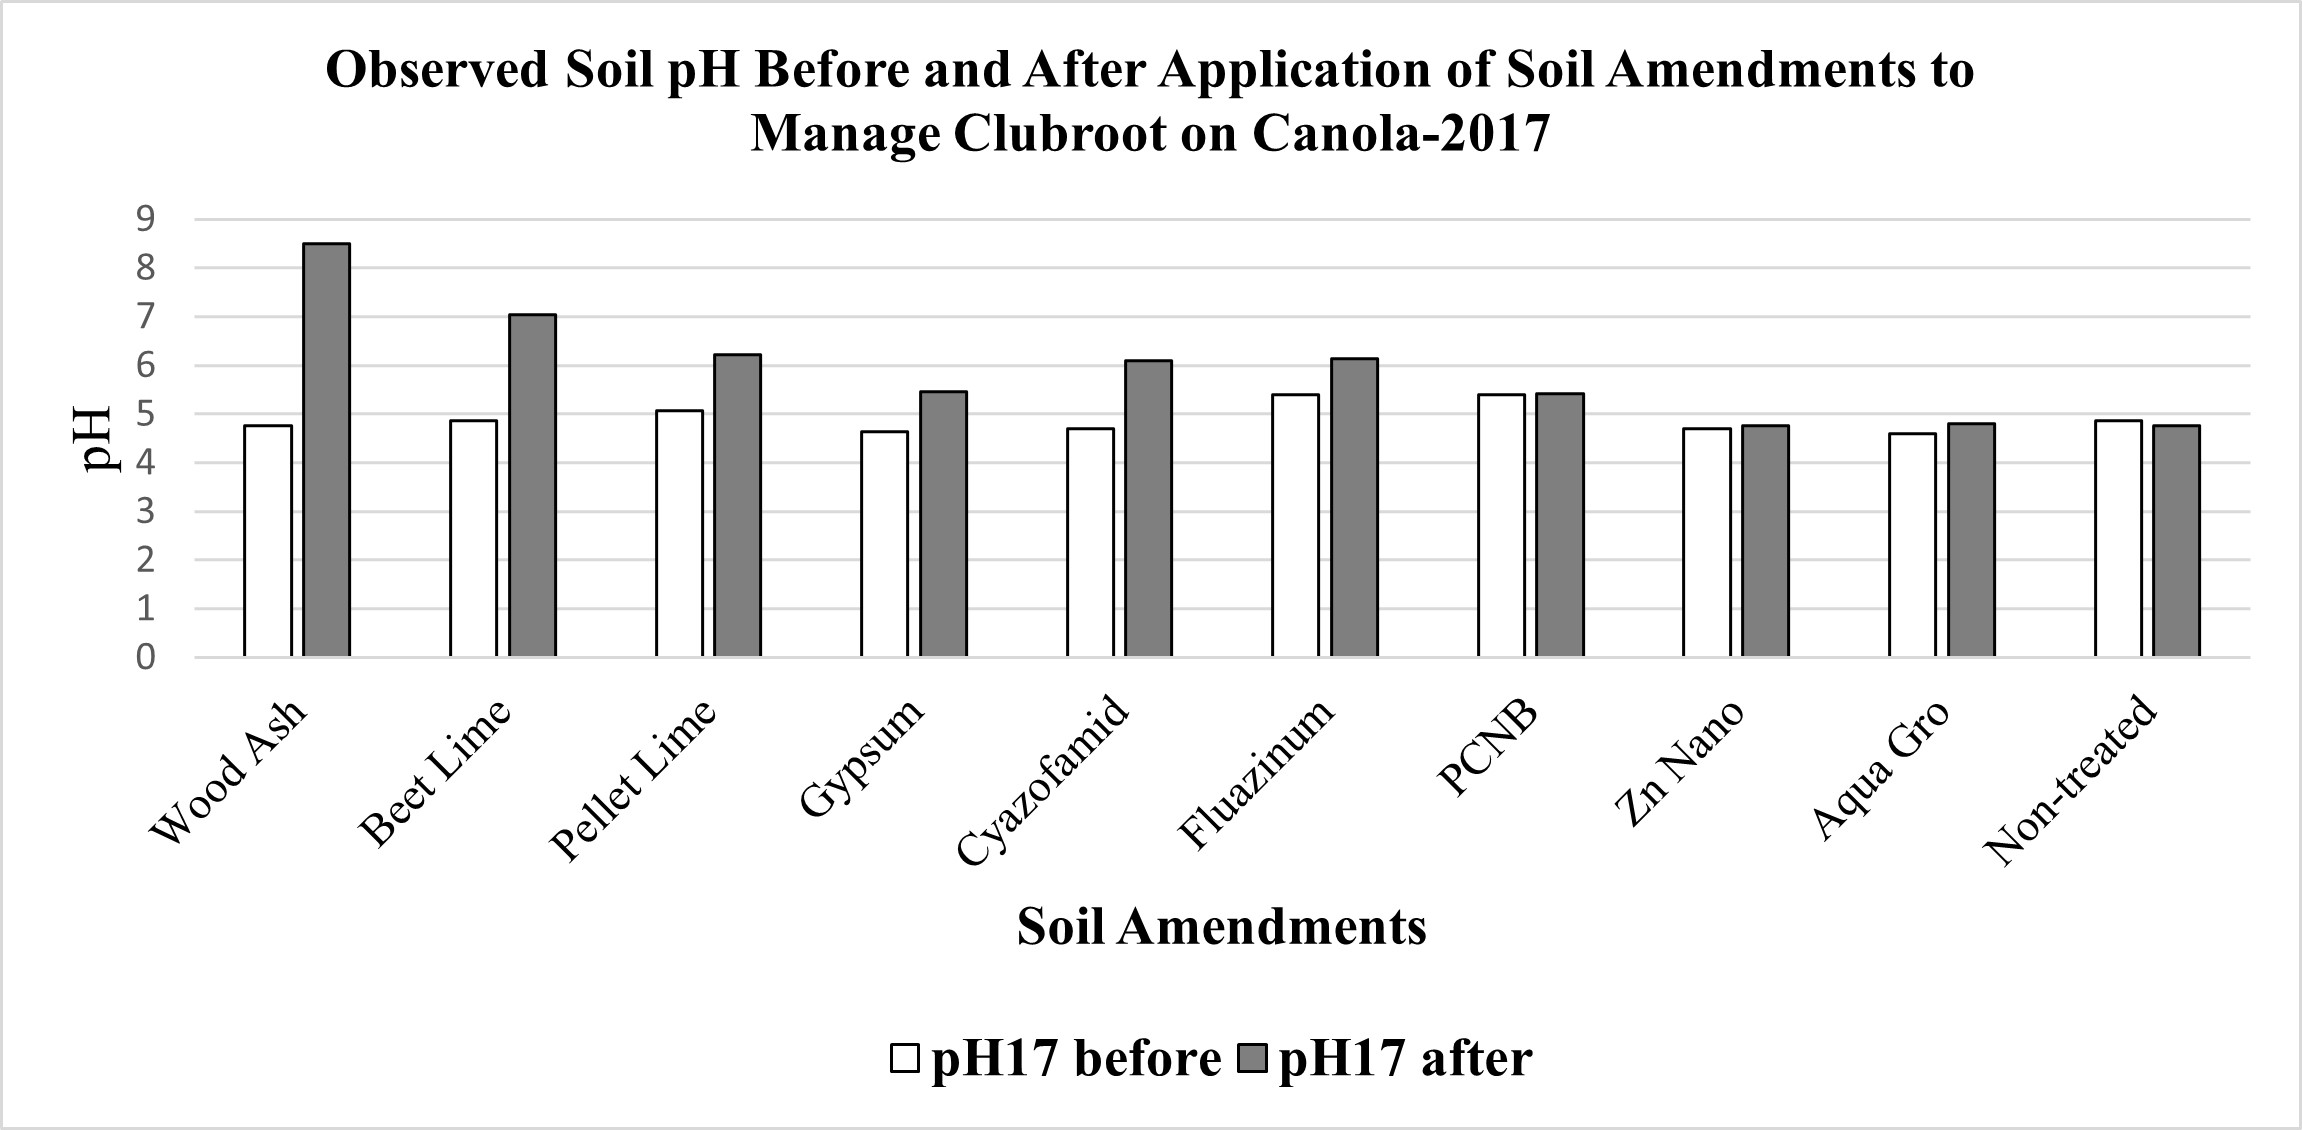 Soil pH before and after application of soil amendments to manage clubroot on canola in 2017.